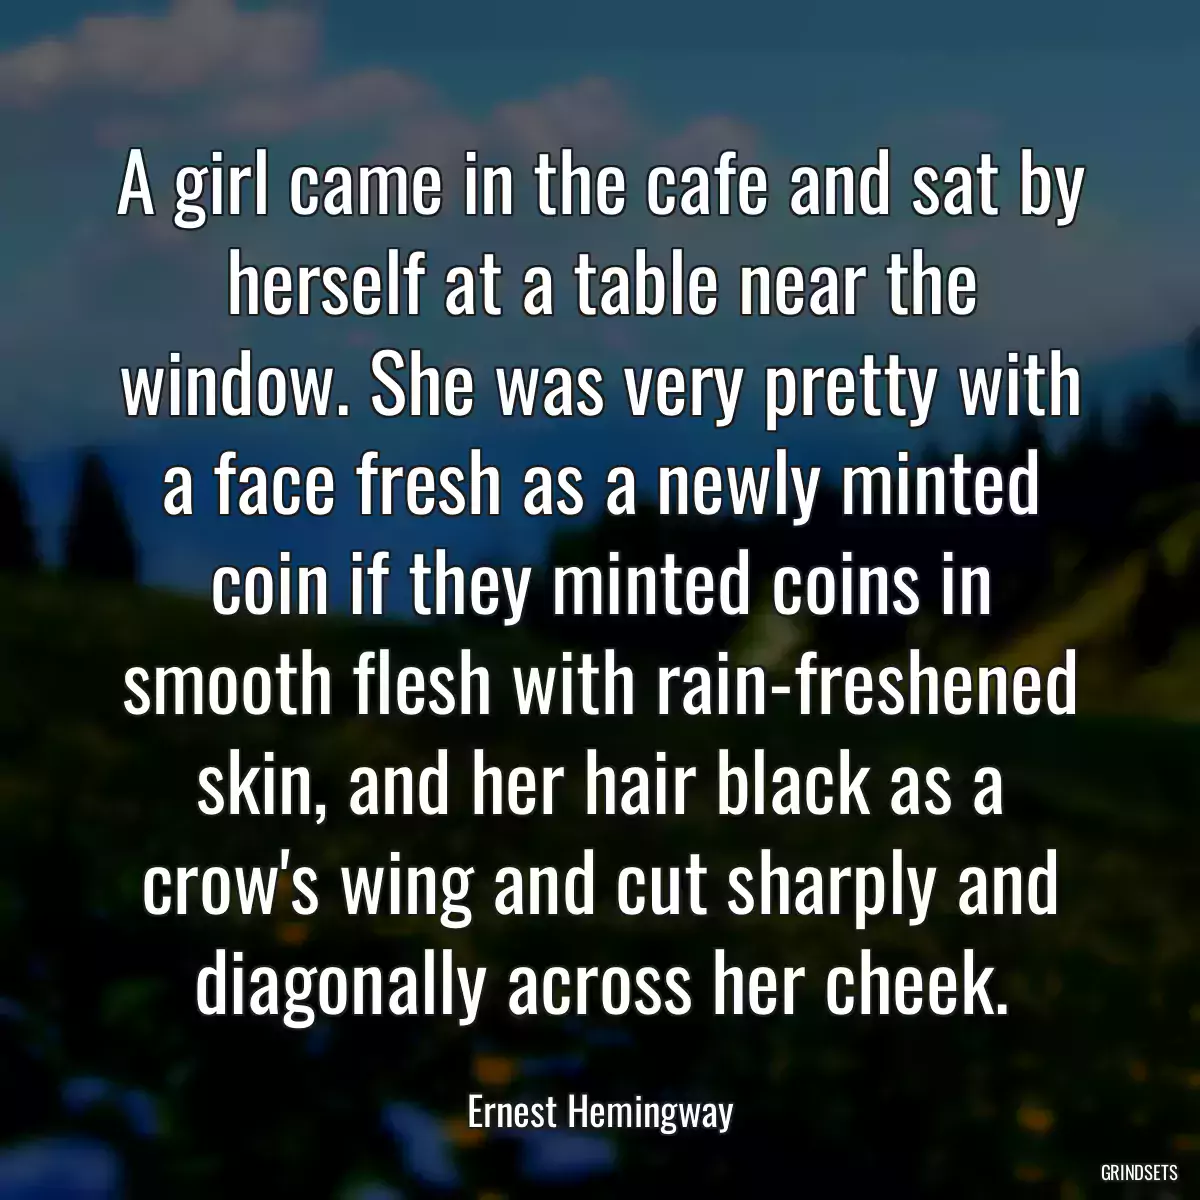 A girl came in the cafe and sat by herself at a table near the window. She was very pretty with a face fresh as a newly minted coin if they minted coins in smooth flesh with rain-freshened skin, and her hair black as a crow\'s wing and cut sharply and diagonally across her cheek.